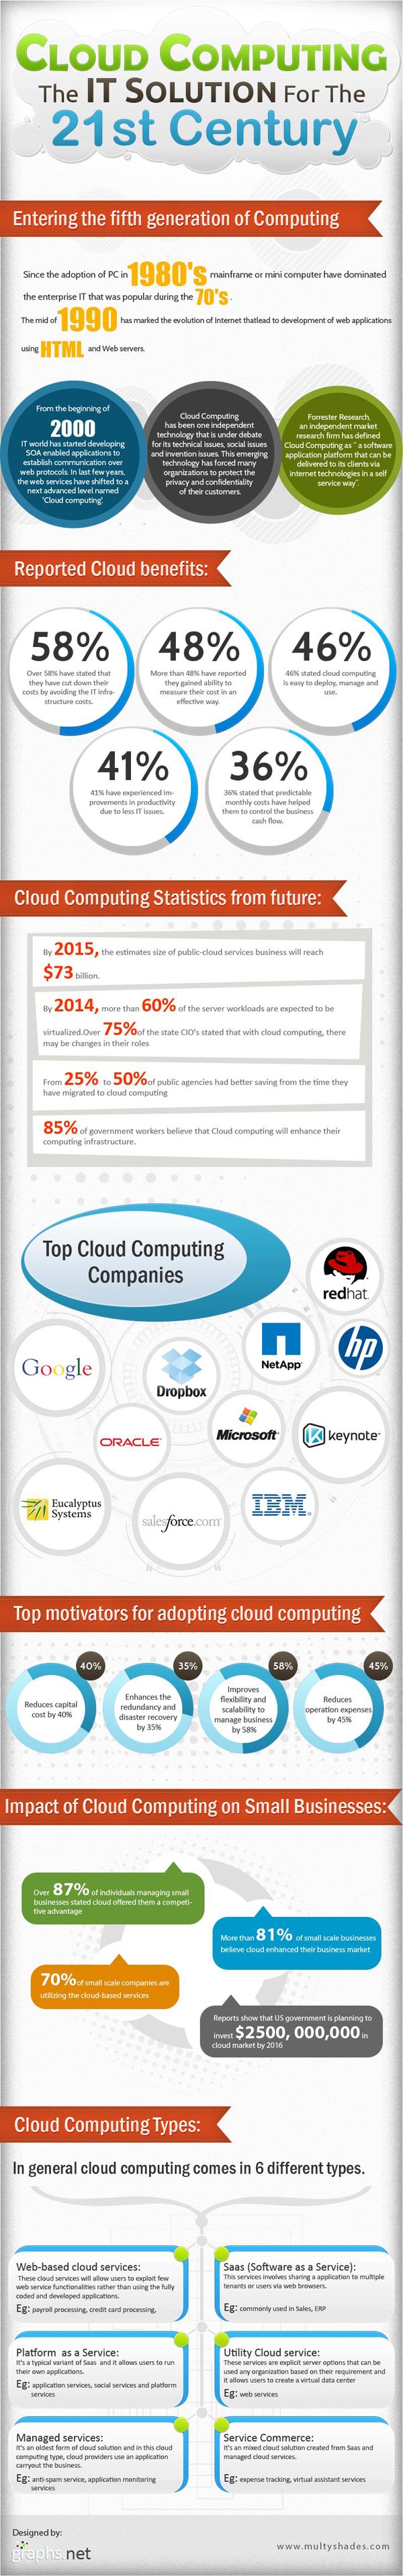 Cloud-computing-the-it-solution-for-the-21st-century.jpg